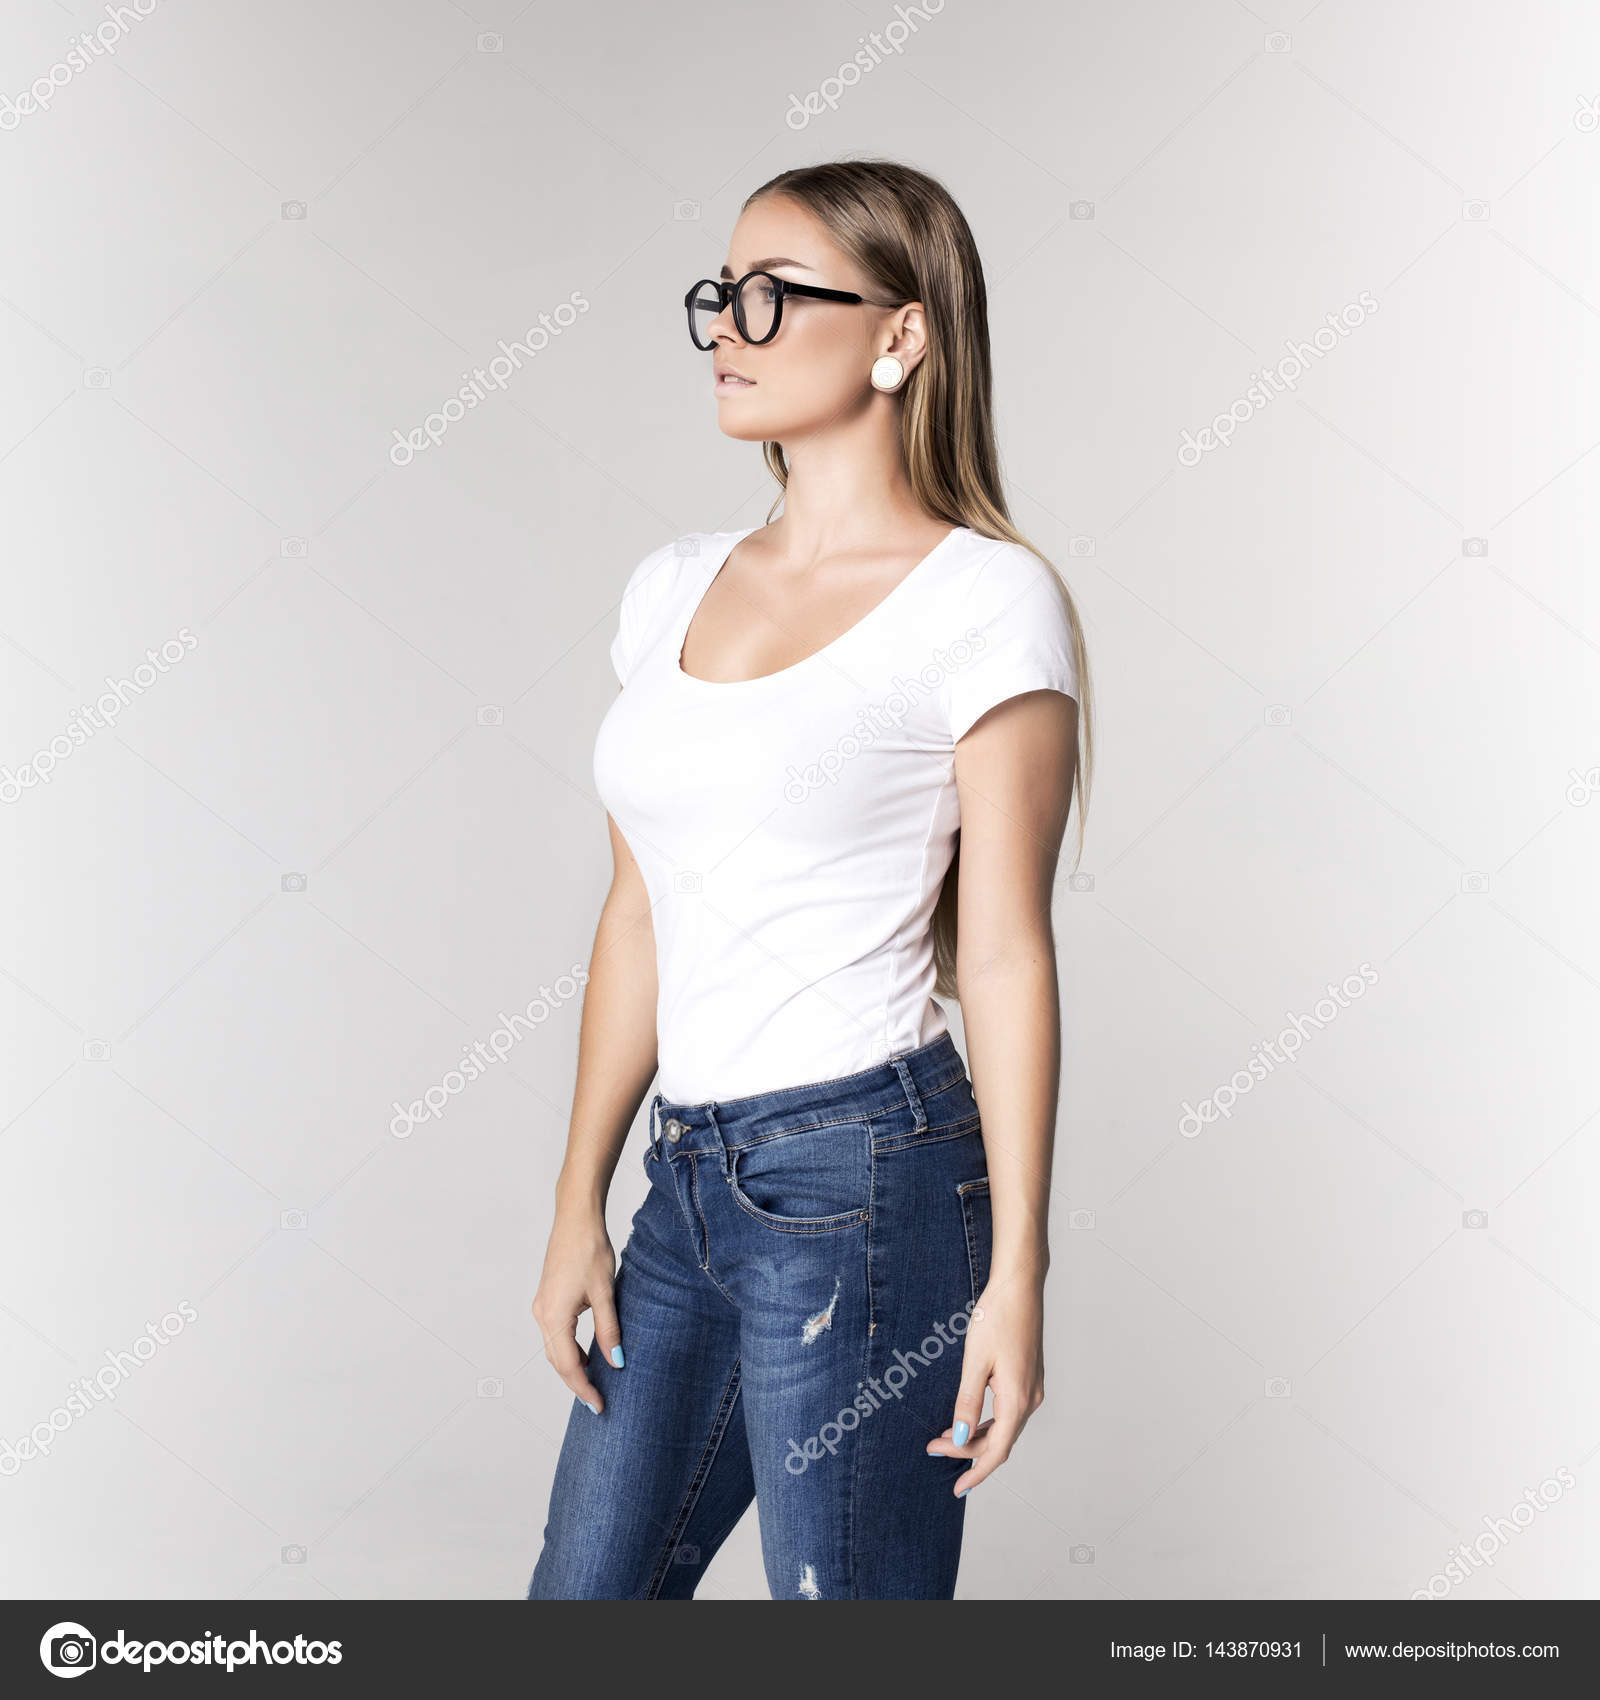 Young Woman With Blond Hair In Blue Jeans Woman Without Makeup Fashion Model Emotional Girl Stock Photo By C Karynache